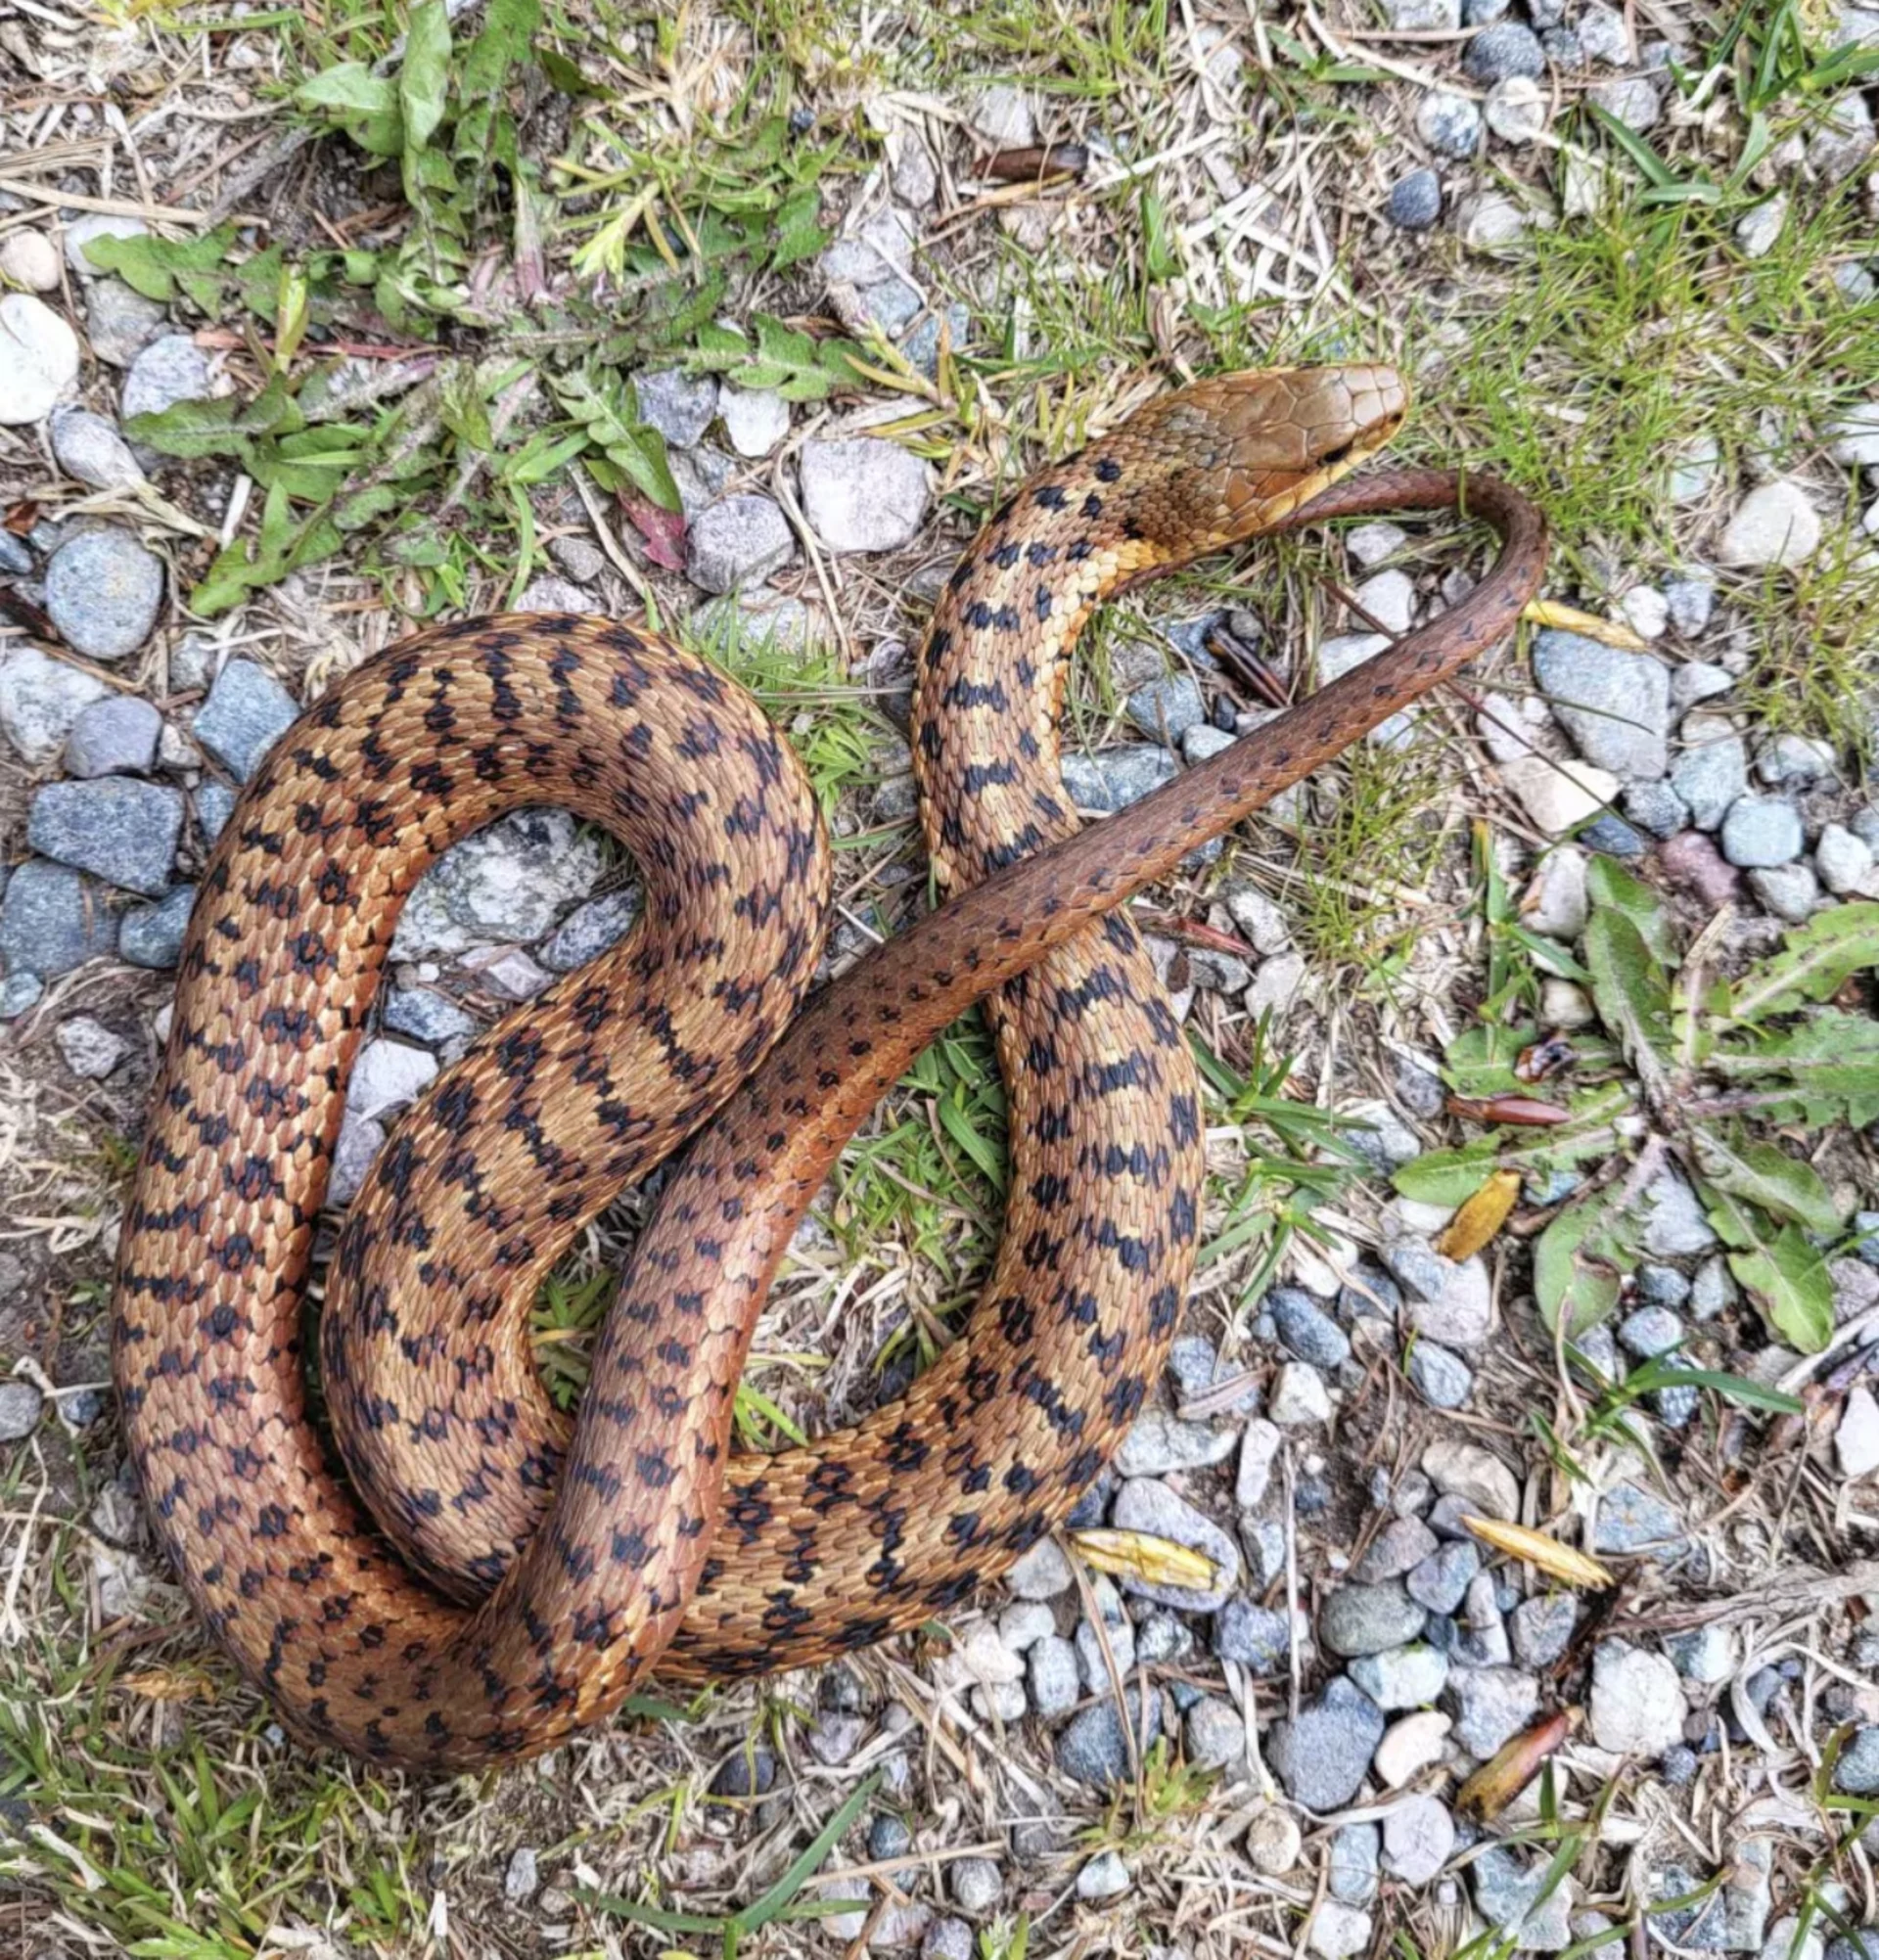 CBC: This garter snake was located in the St. David's area of Bay St. George South. (Submitted to CBC by Andrea Gigeroff)